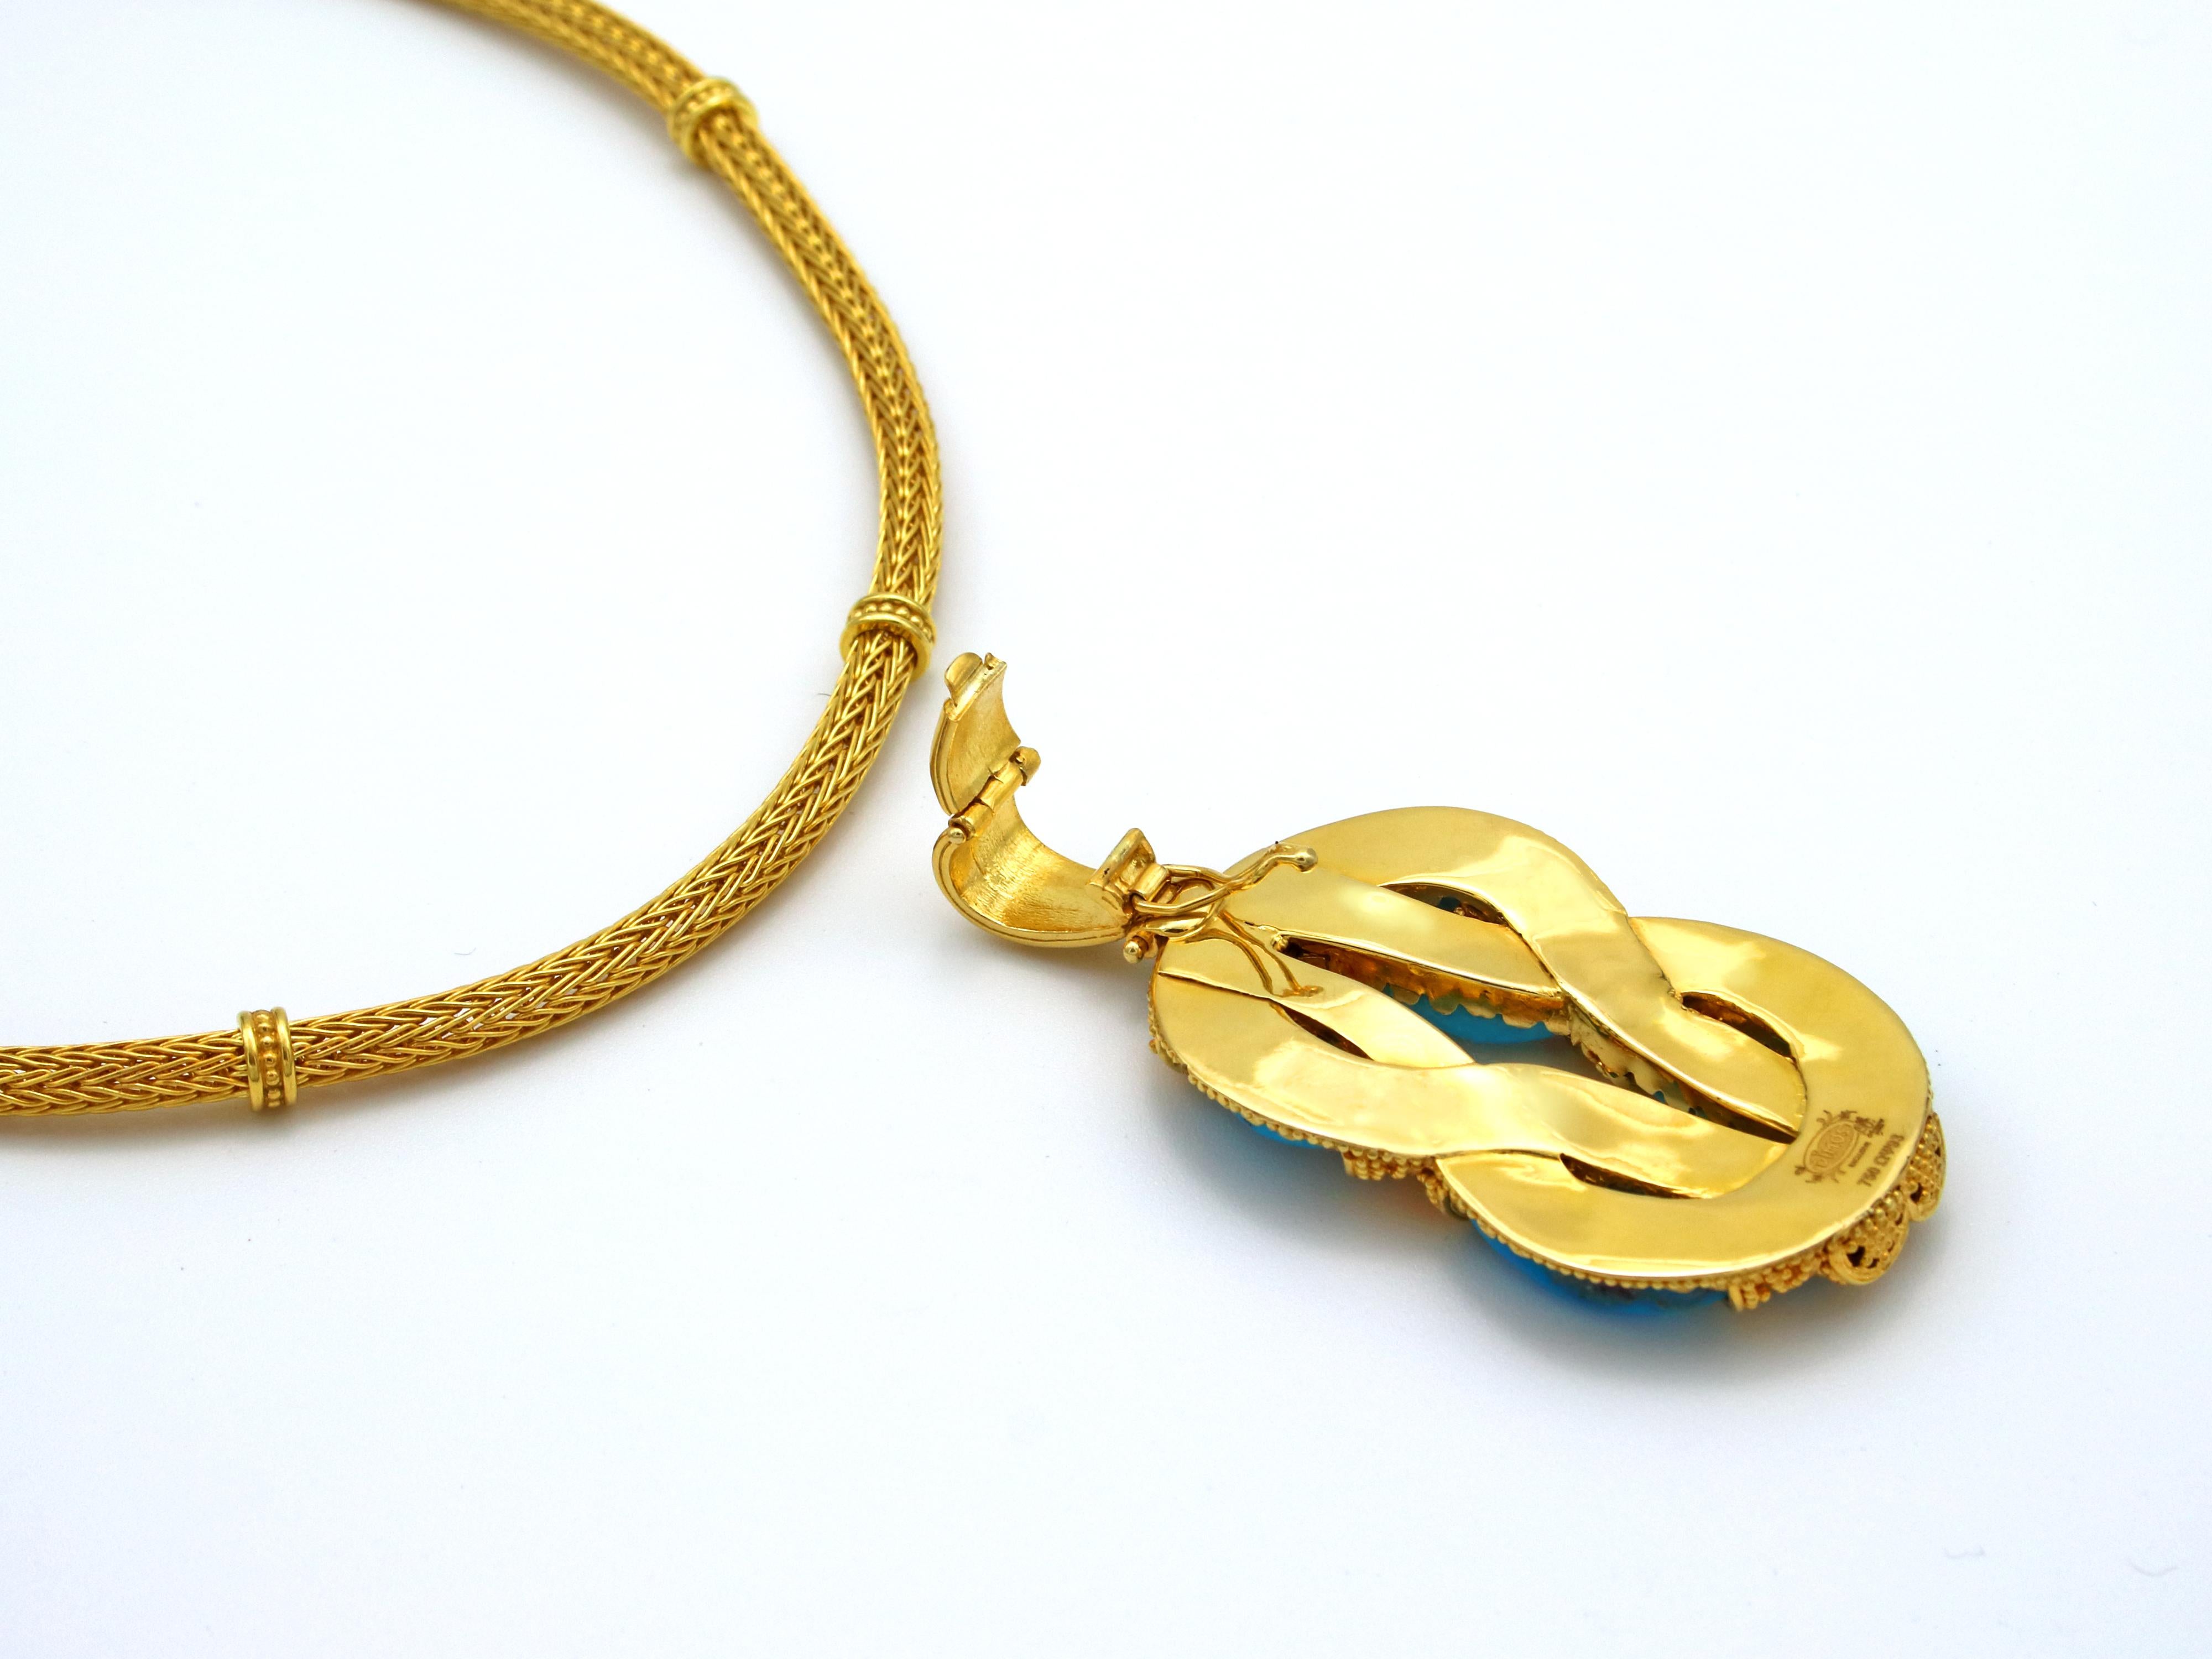 Classical Greek Dimos 18k Gold Knitted Necklace with Hercules Knot Pendant